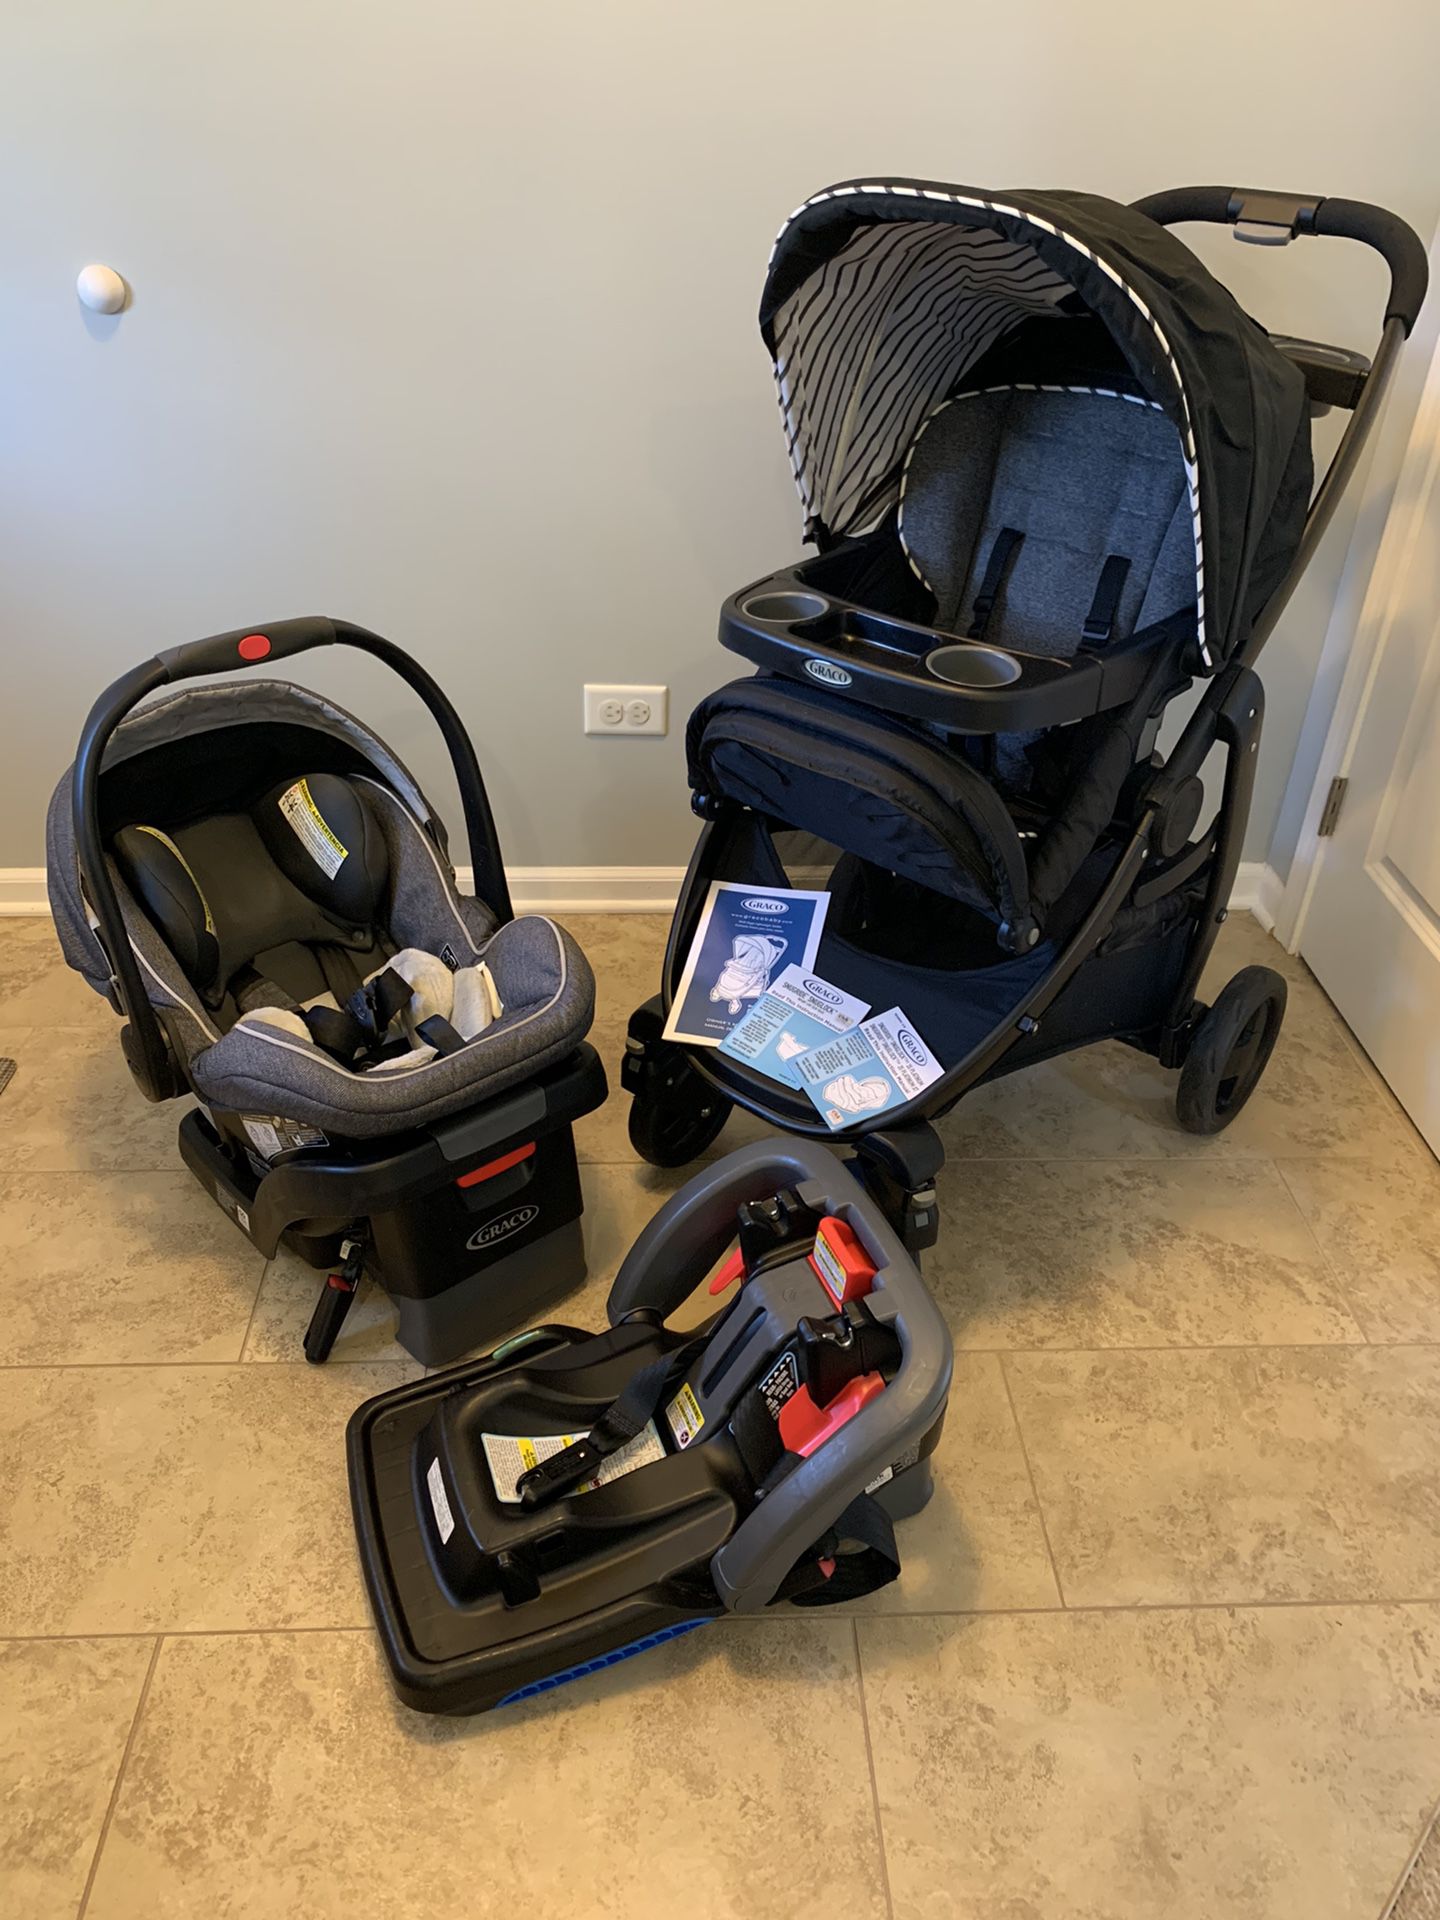 Graco modes travel system infant car seat carrier stroller and extra base EXCELLENT condition